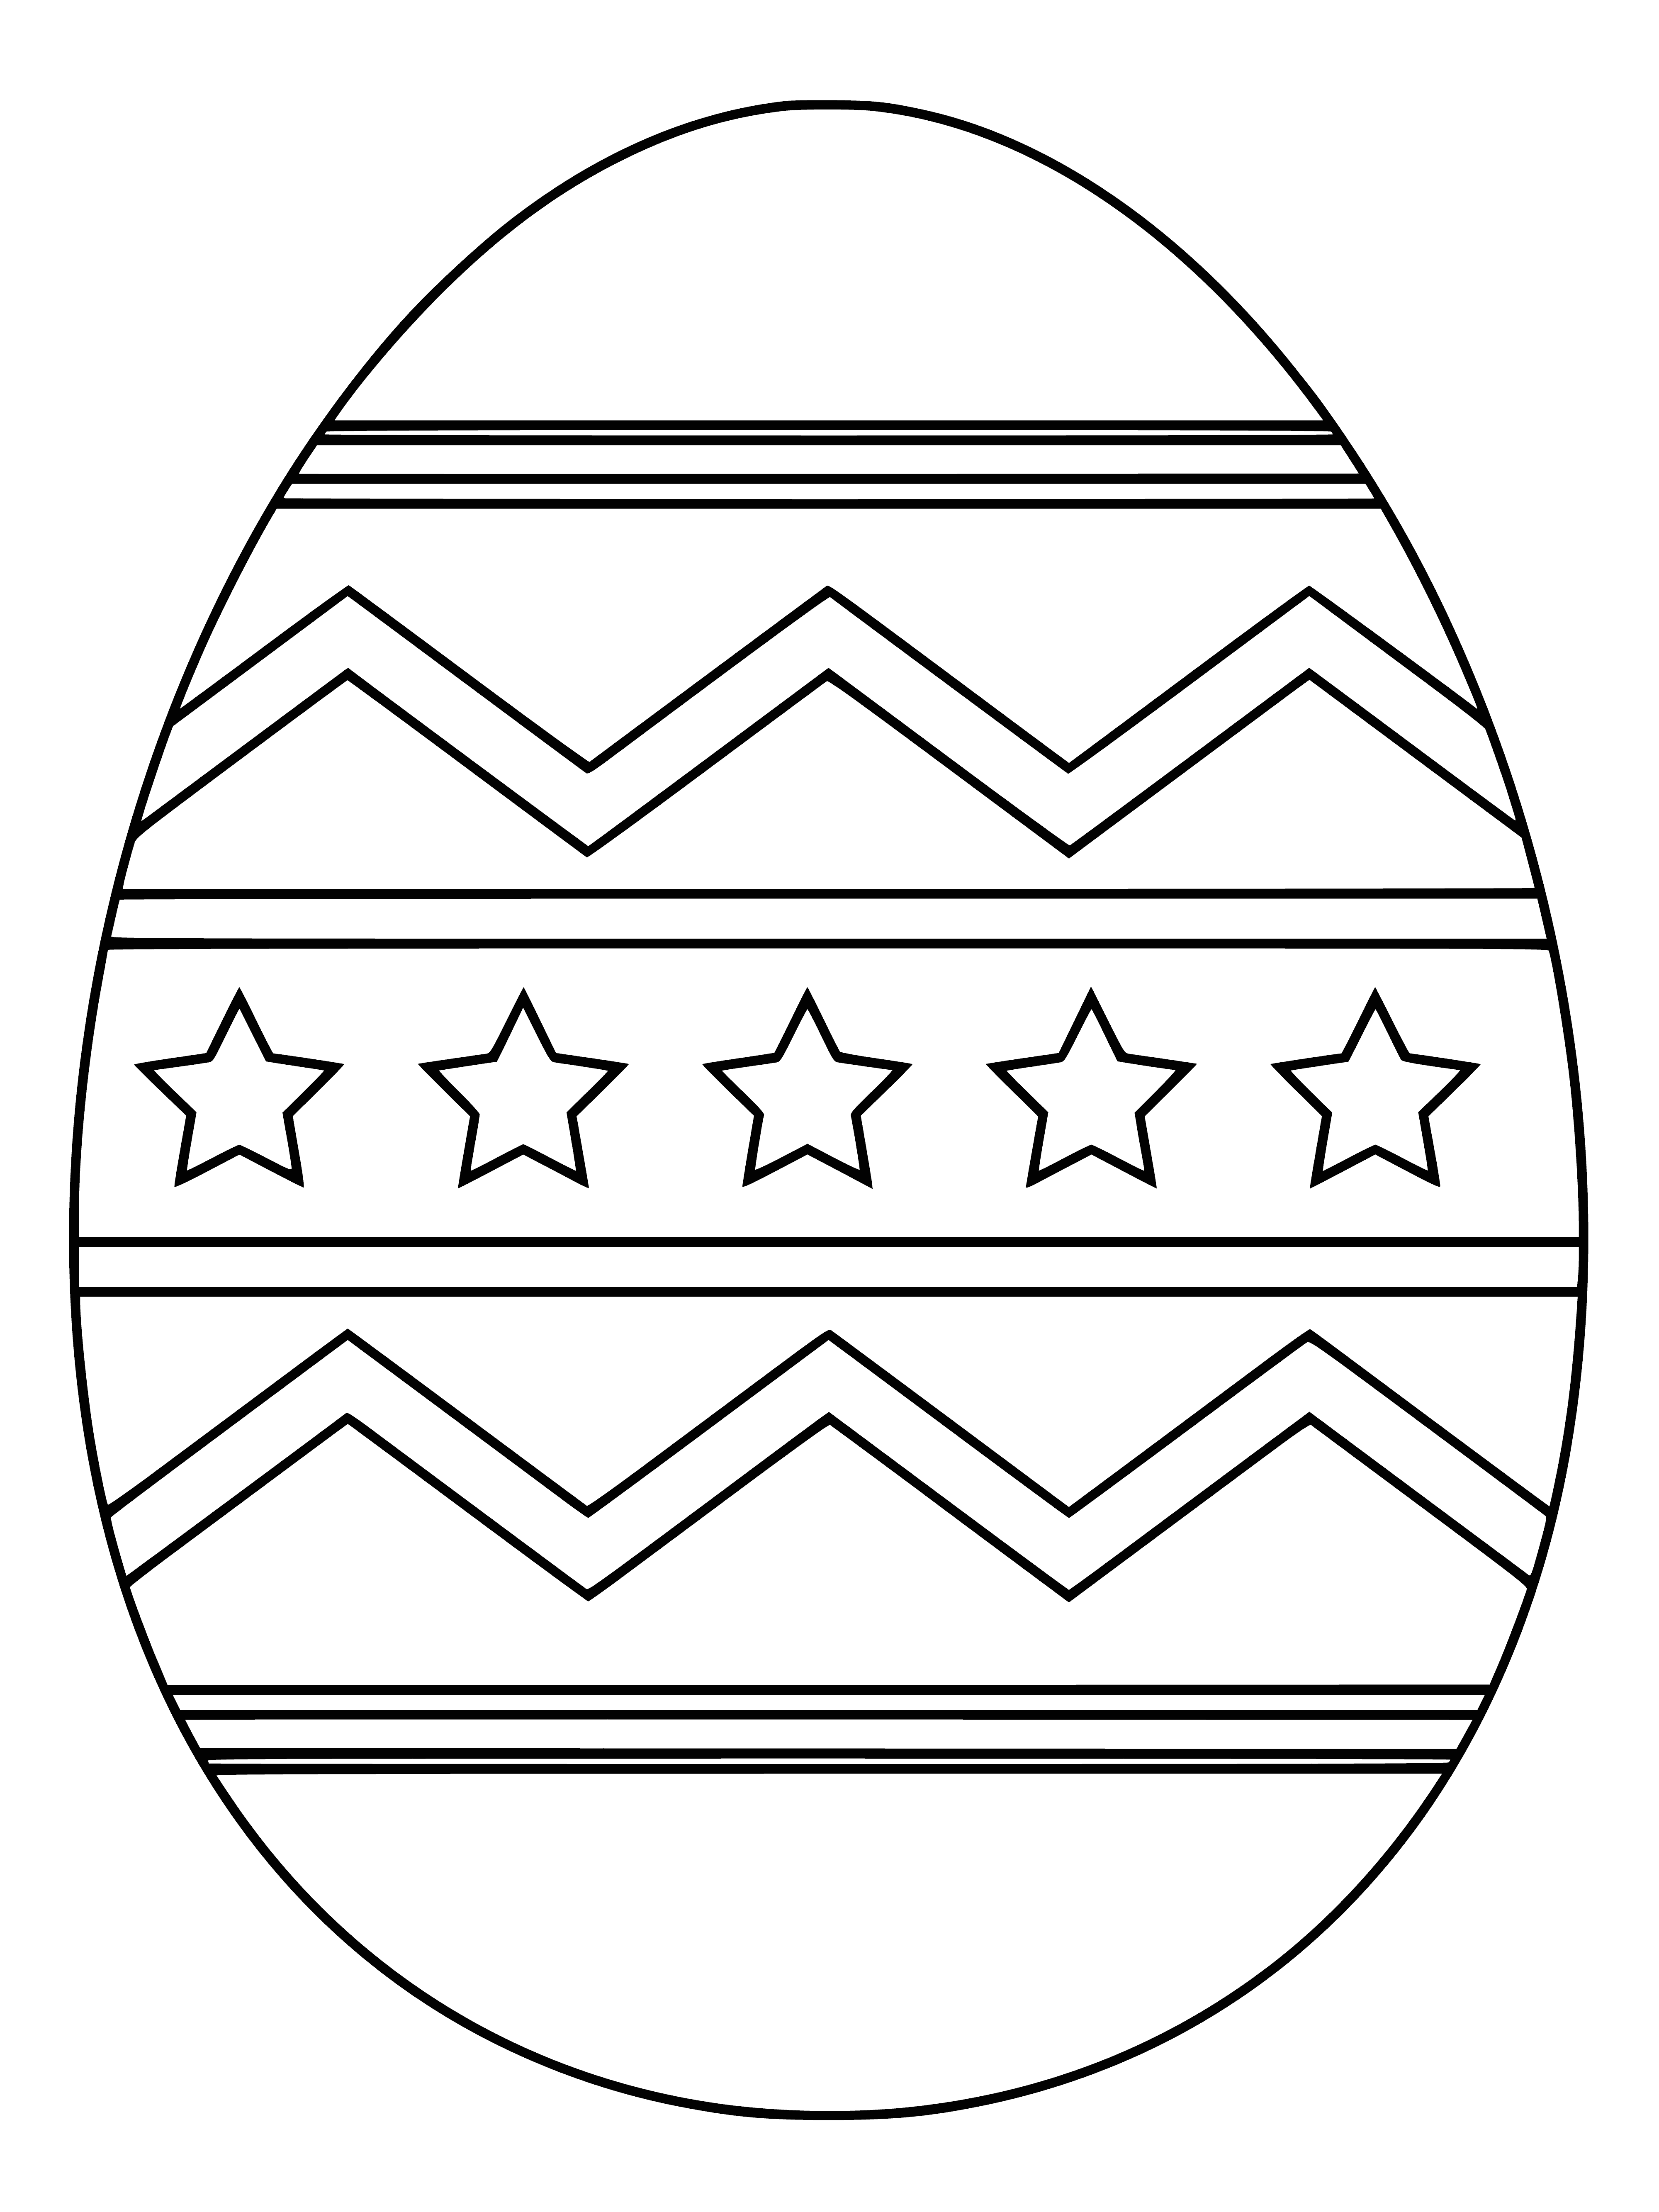 coloring page: A light blue egg with a white bunny, pink nose & chicks. Green & purple eggs. Perfect for Easter!